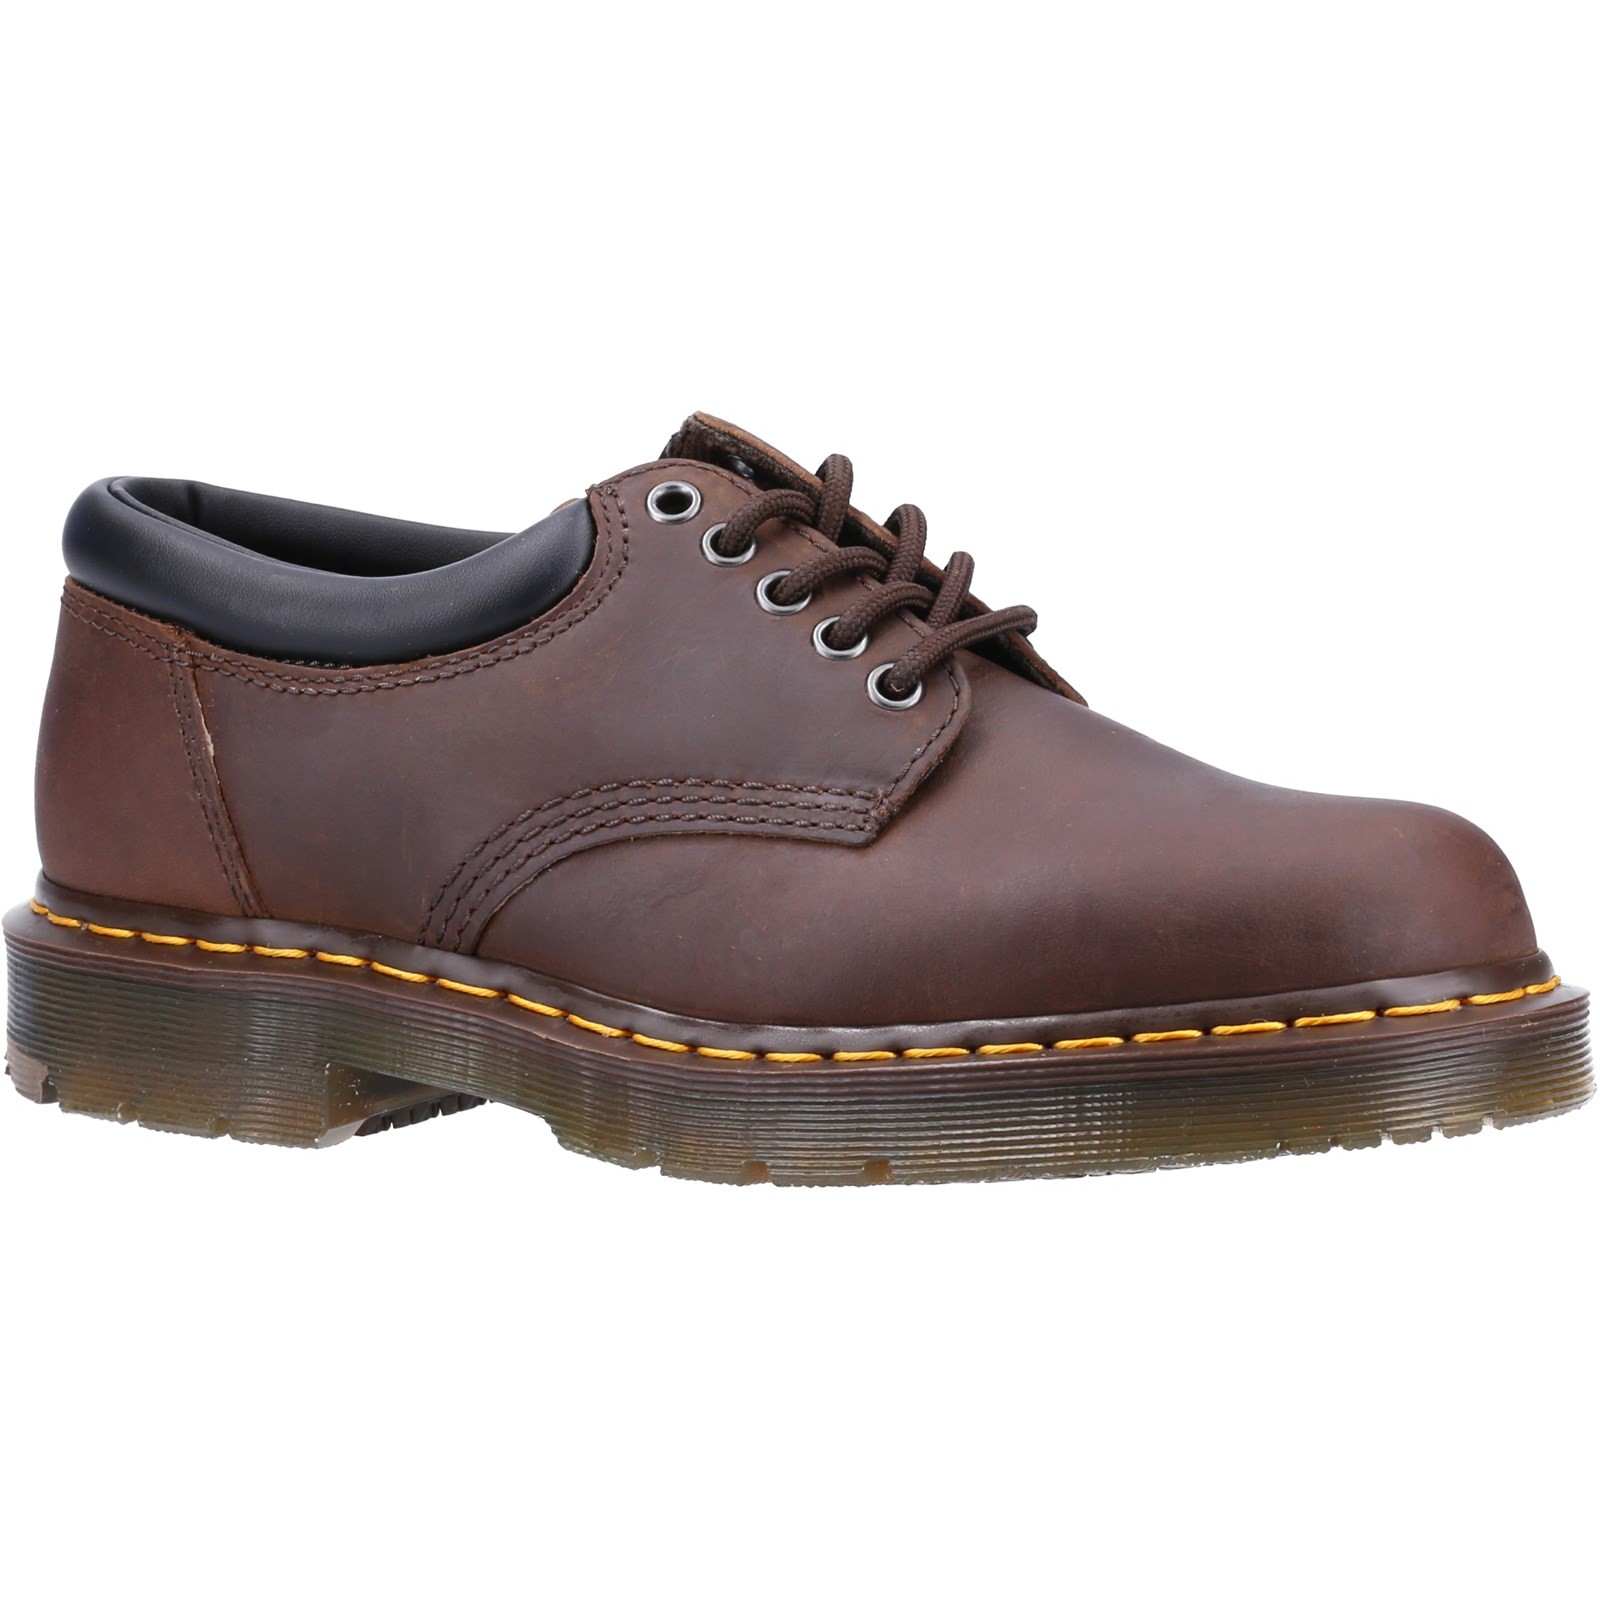 8053 Slip Resistant Leather Shoes